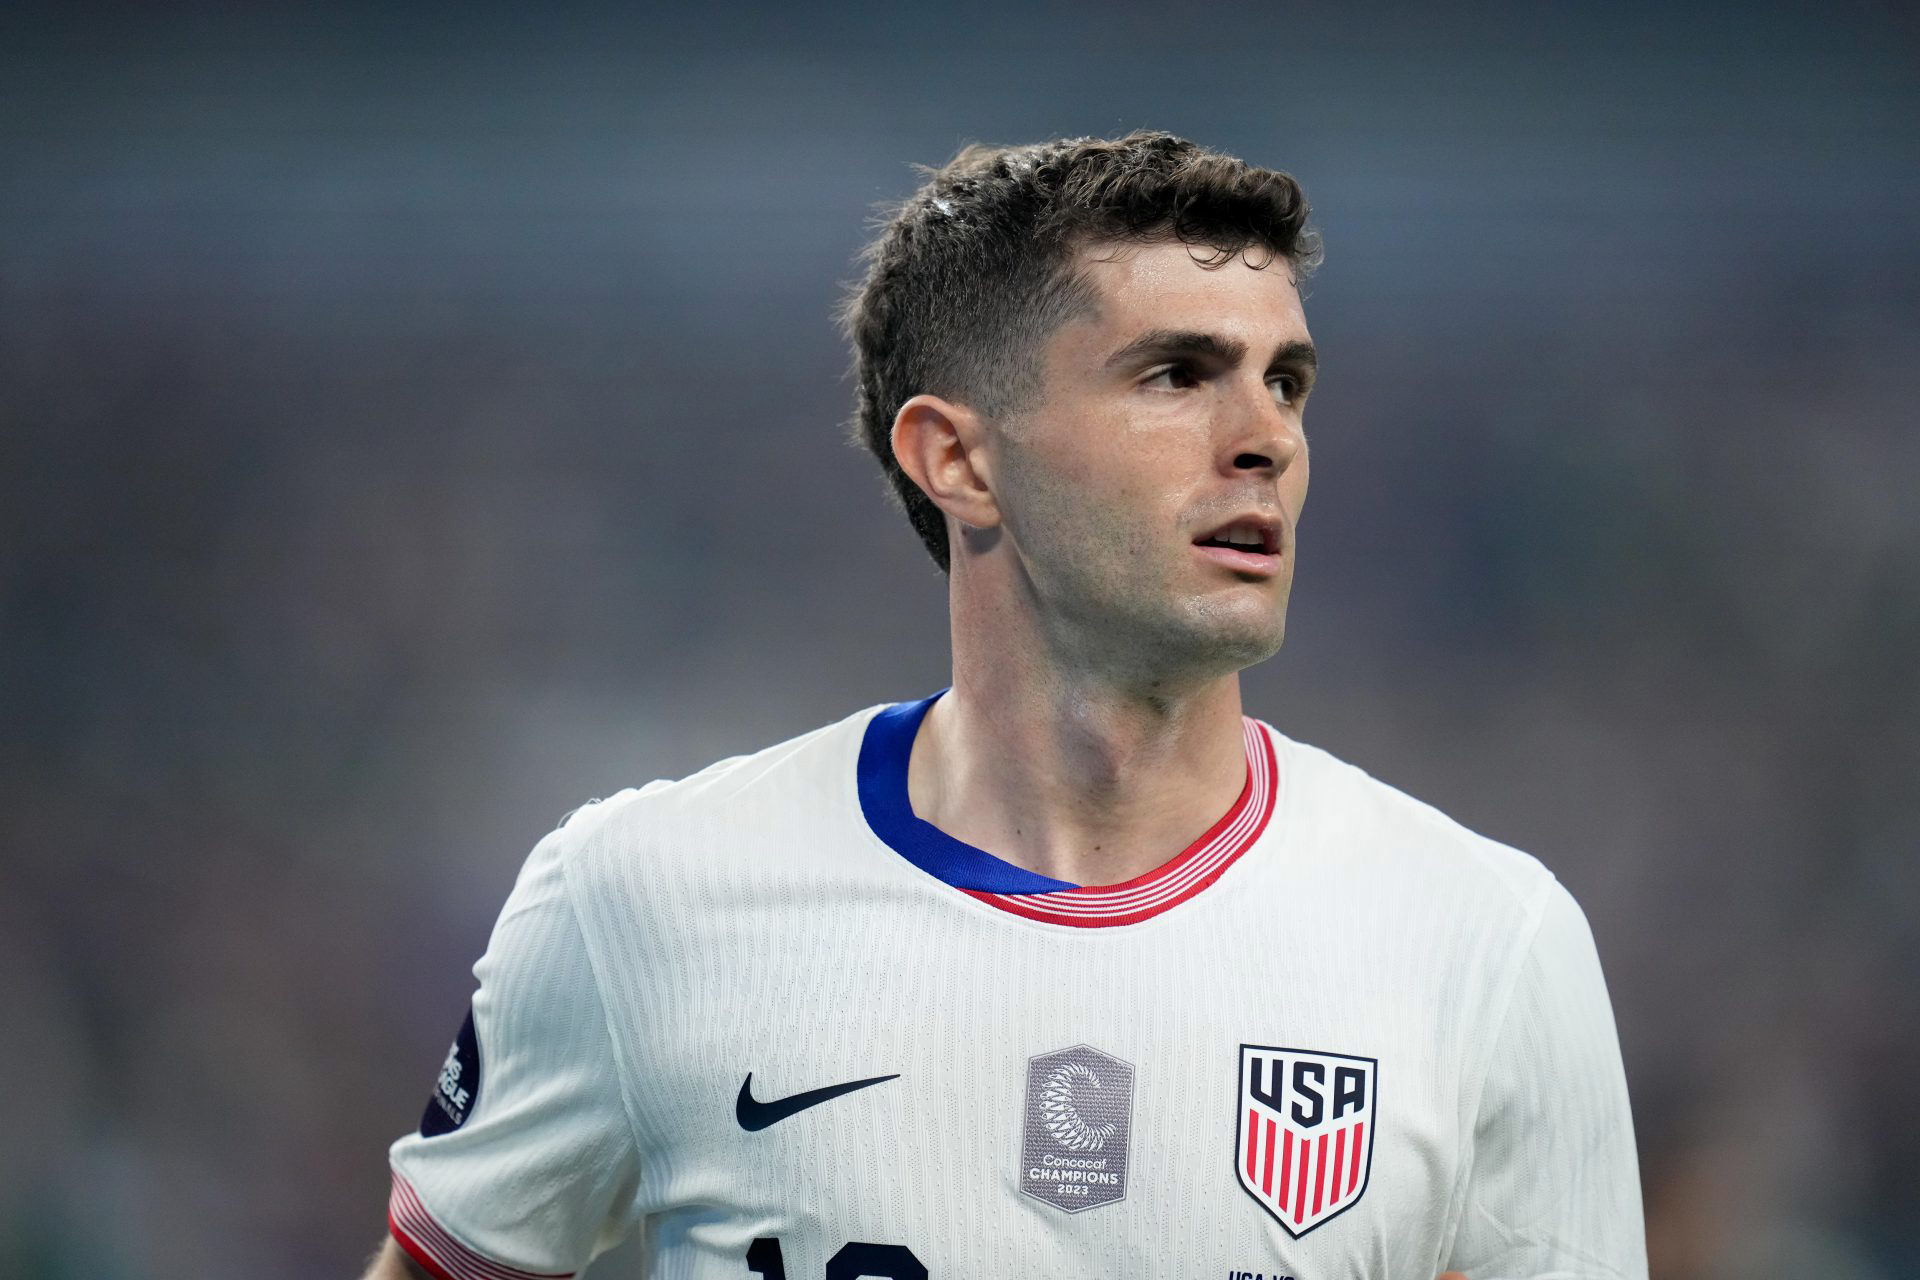 Is Christian Pulisic the greatest USA soccer player of all time?